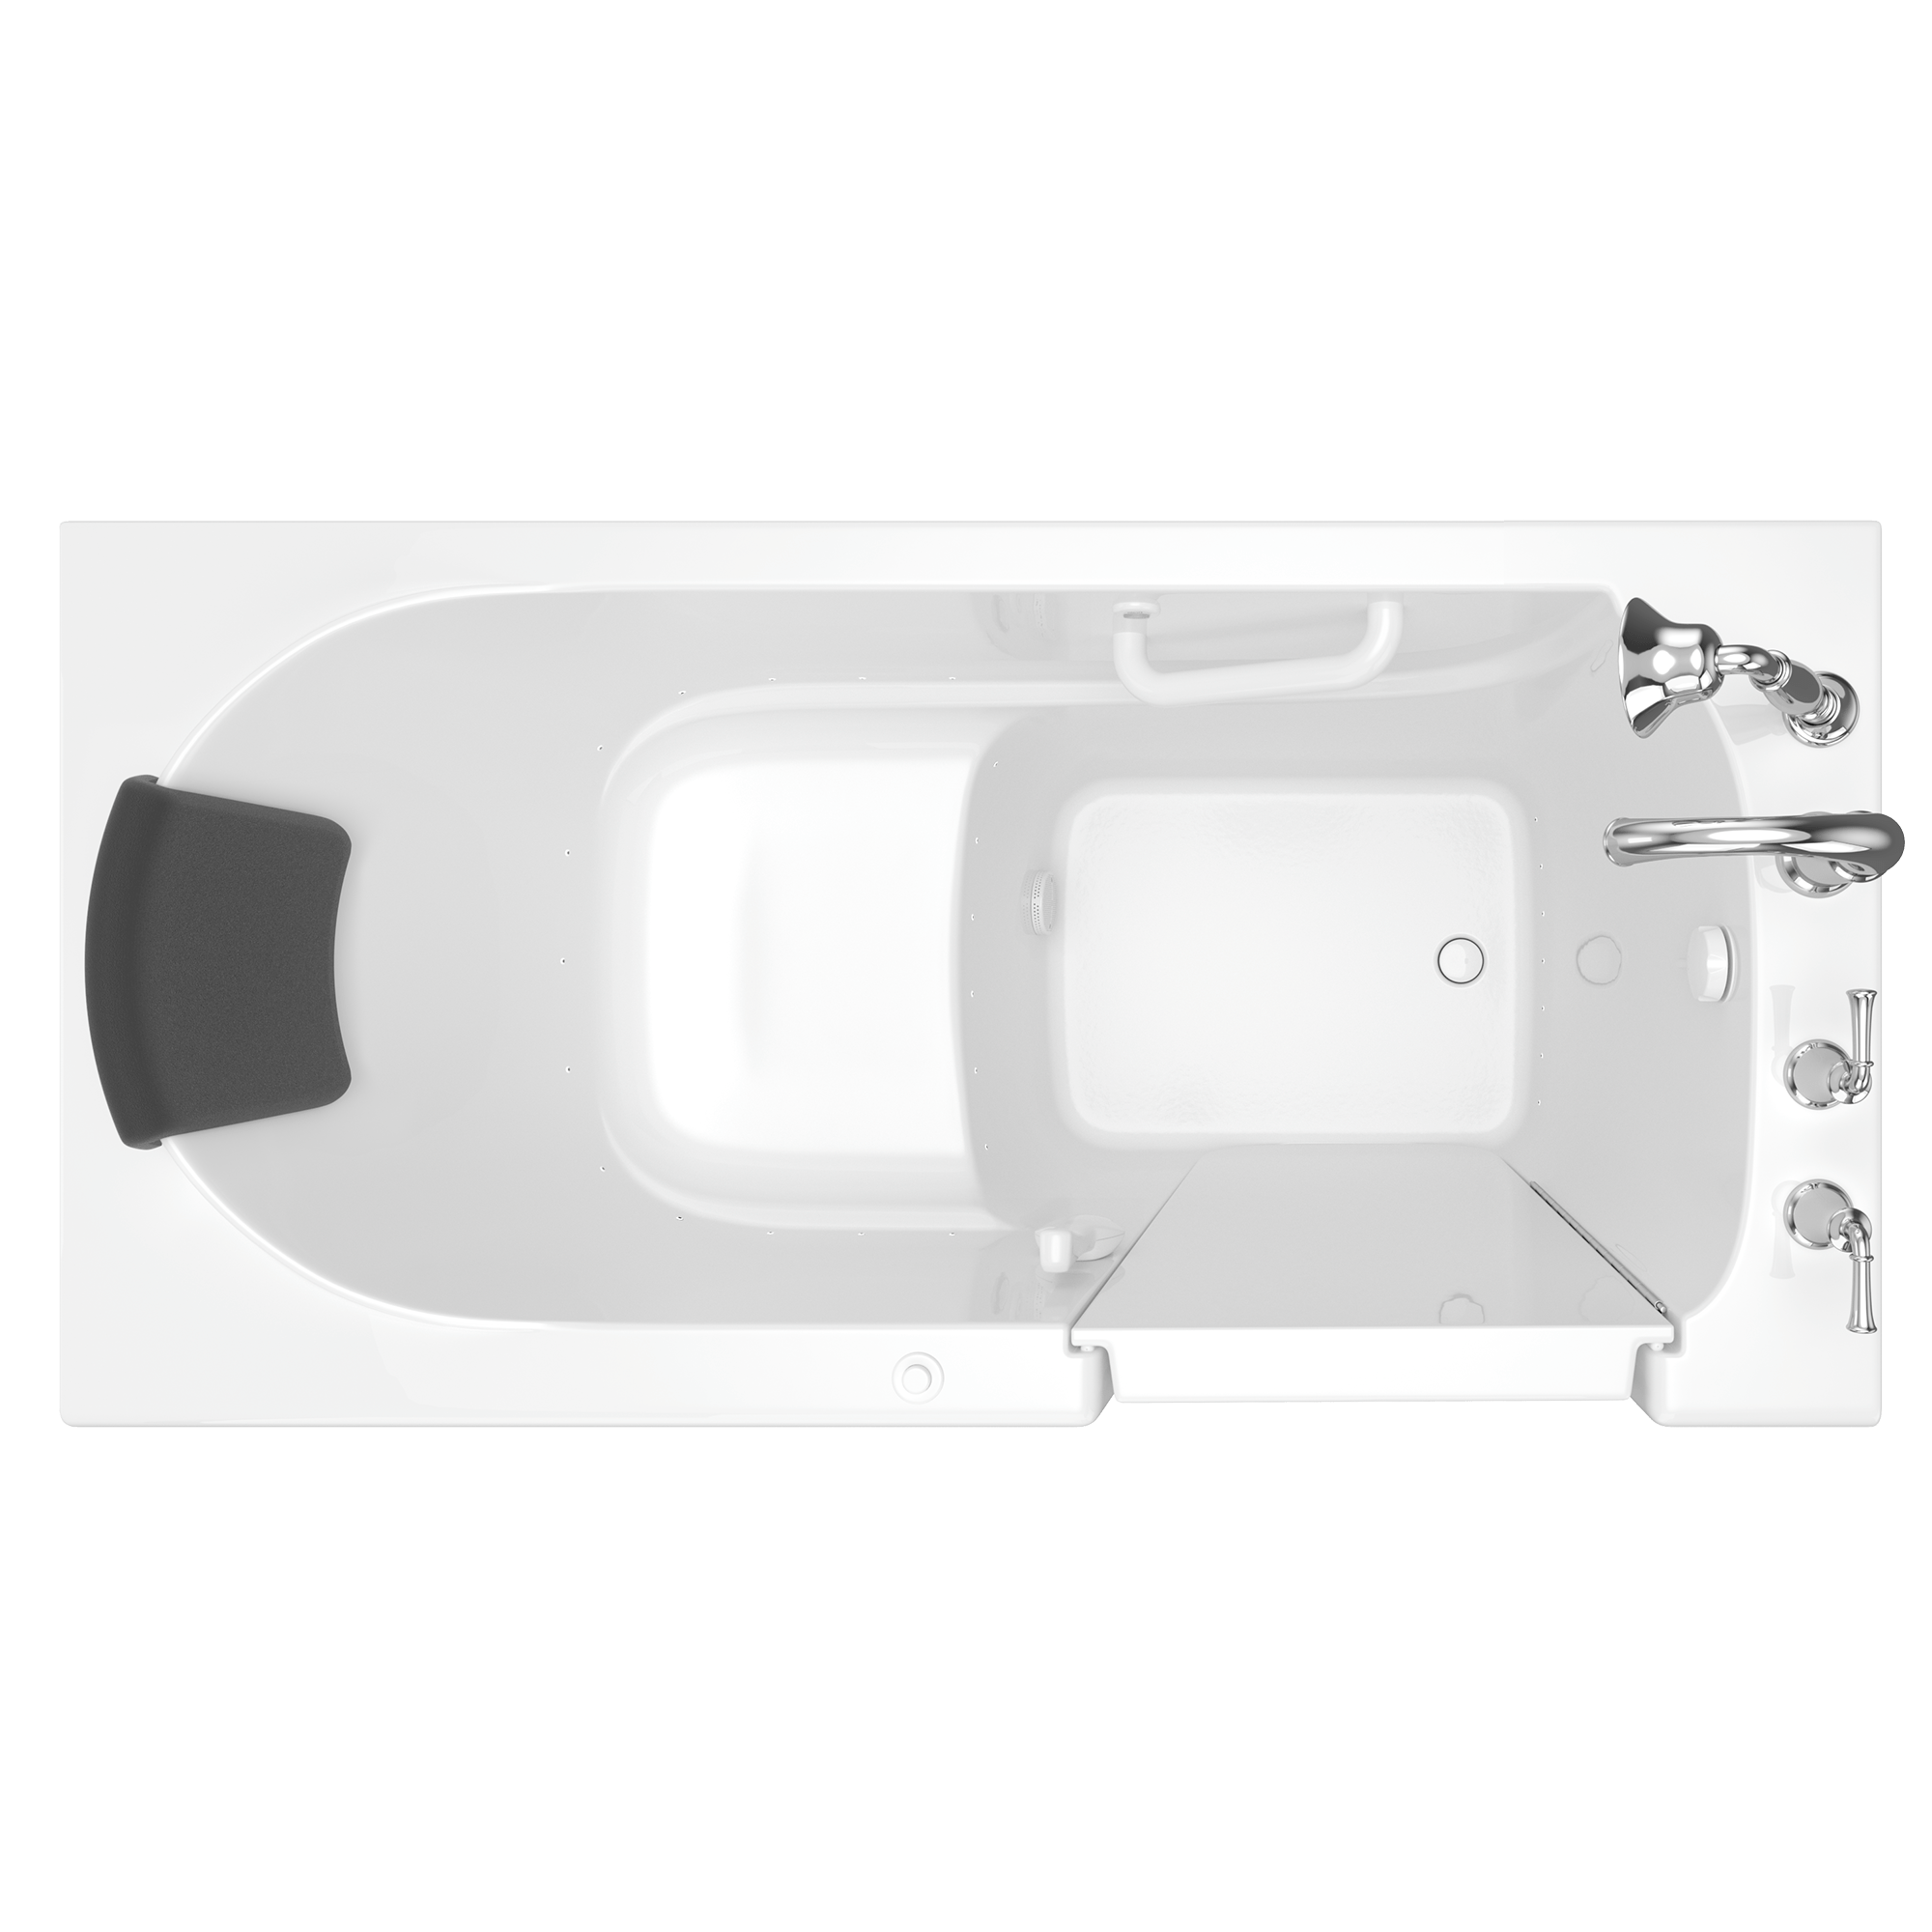 Gelcoat Premium Series 60x30 Inch Walk-In Bathtub with Air Massage System - Right Hand Door and Drain